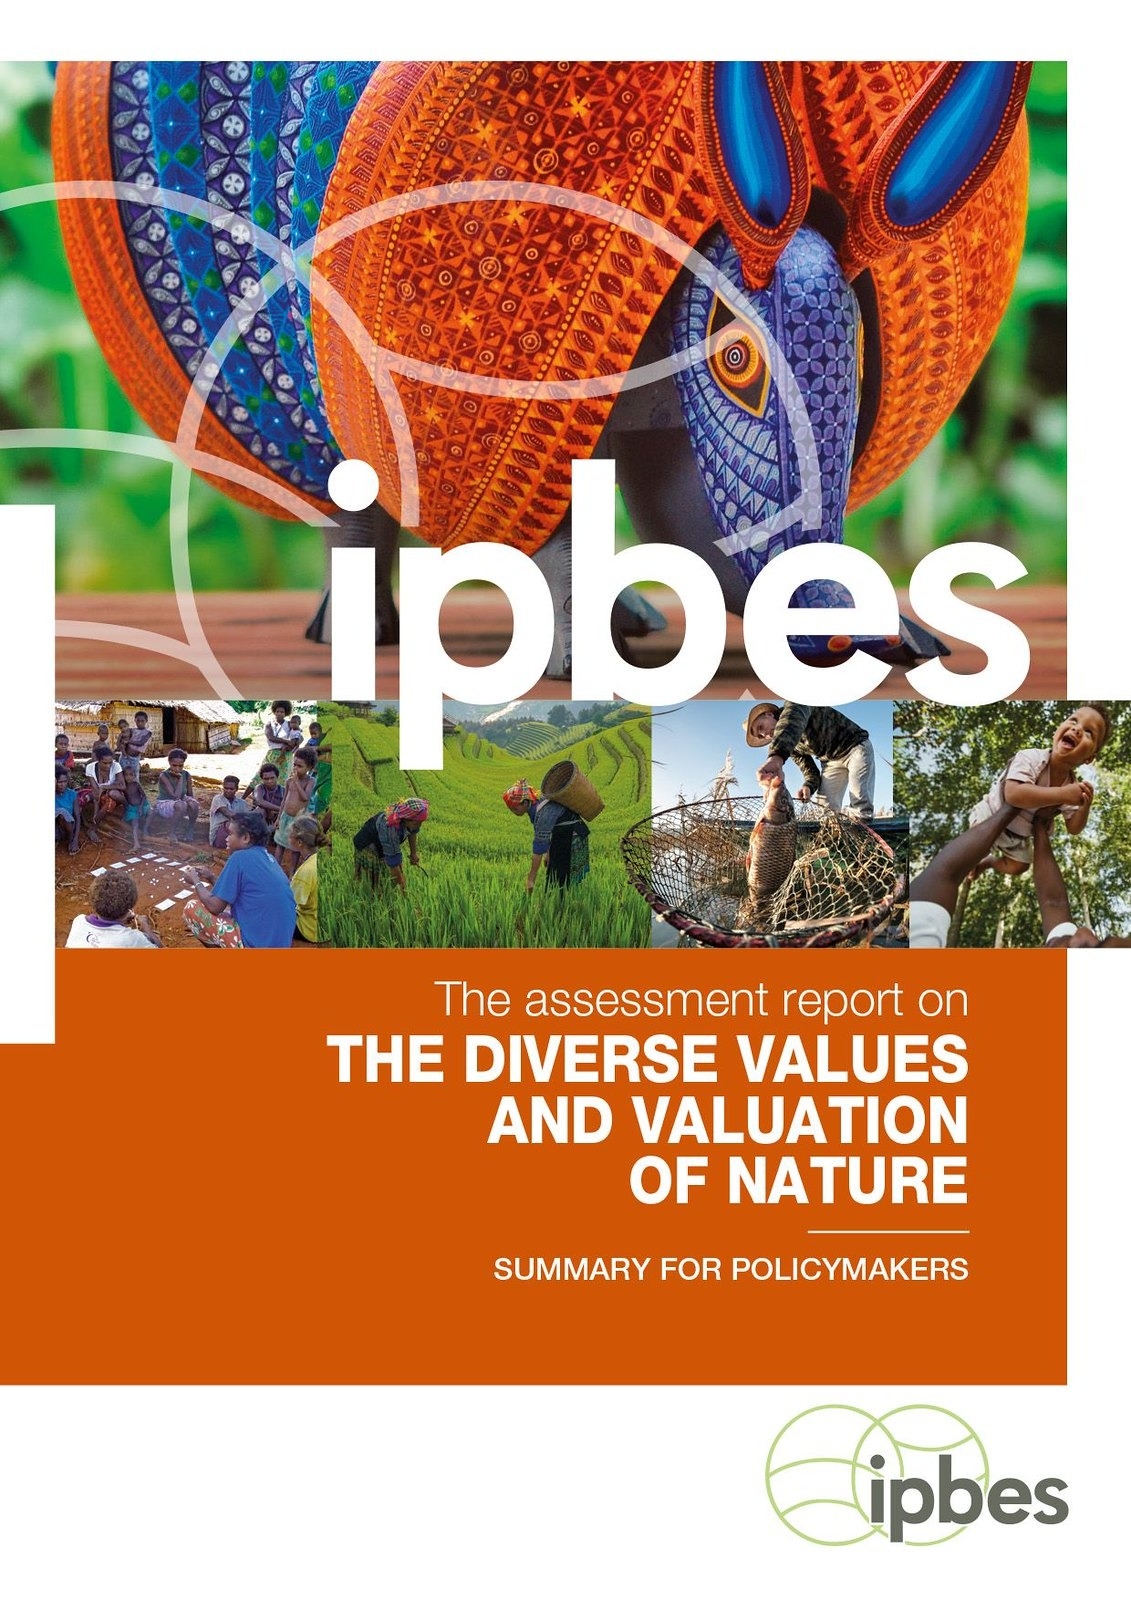 IPBES發布《自然的多樣價值和價值推估方法評估報告》（Assessment Report on the Diverse Values and Valuation of Nature）的決策者摘要部分。圖片來源：IPBES